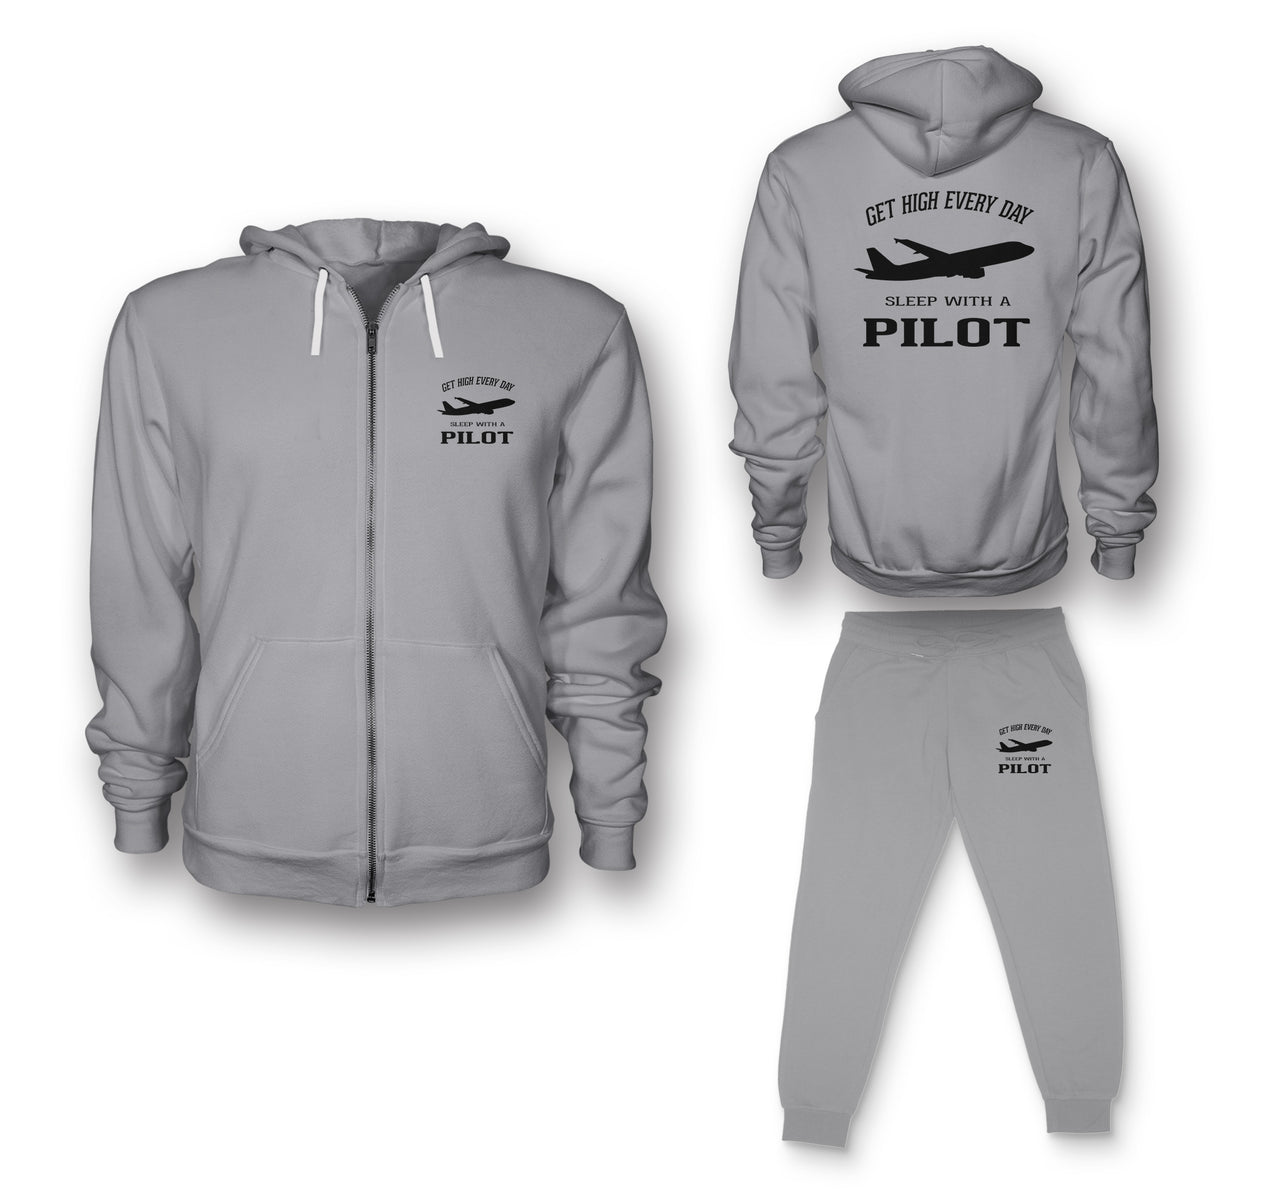 Get High Every Day Sleep With A Pilot Designed Zipped Hoodies & Sweatpants Set